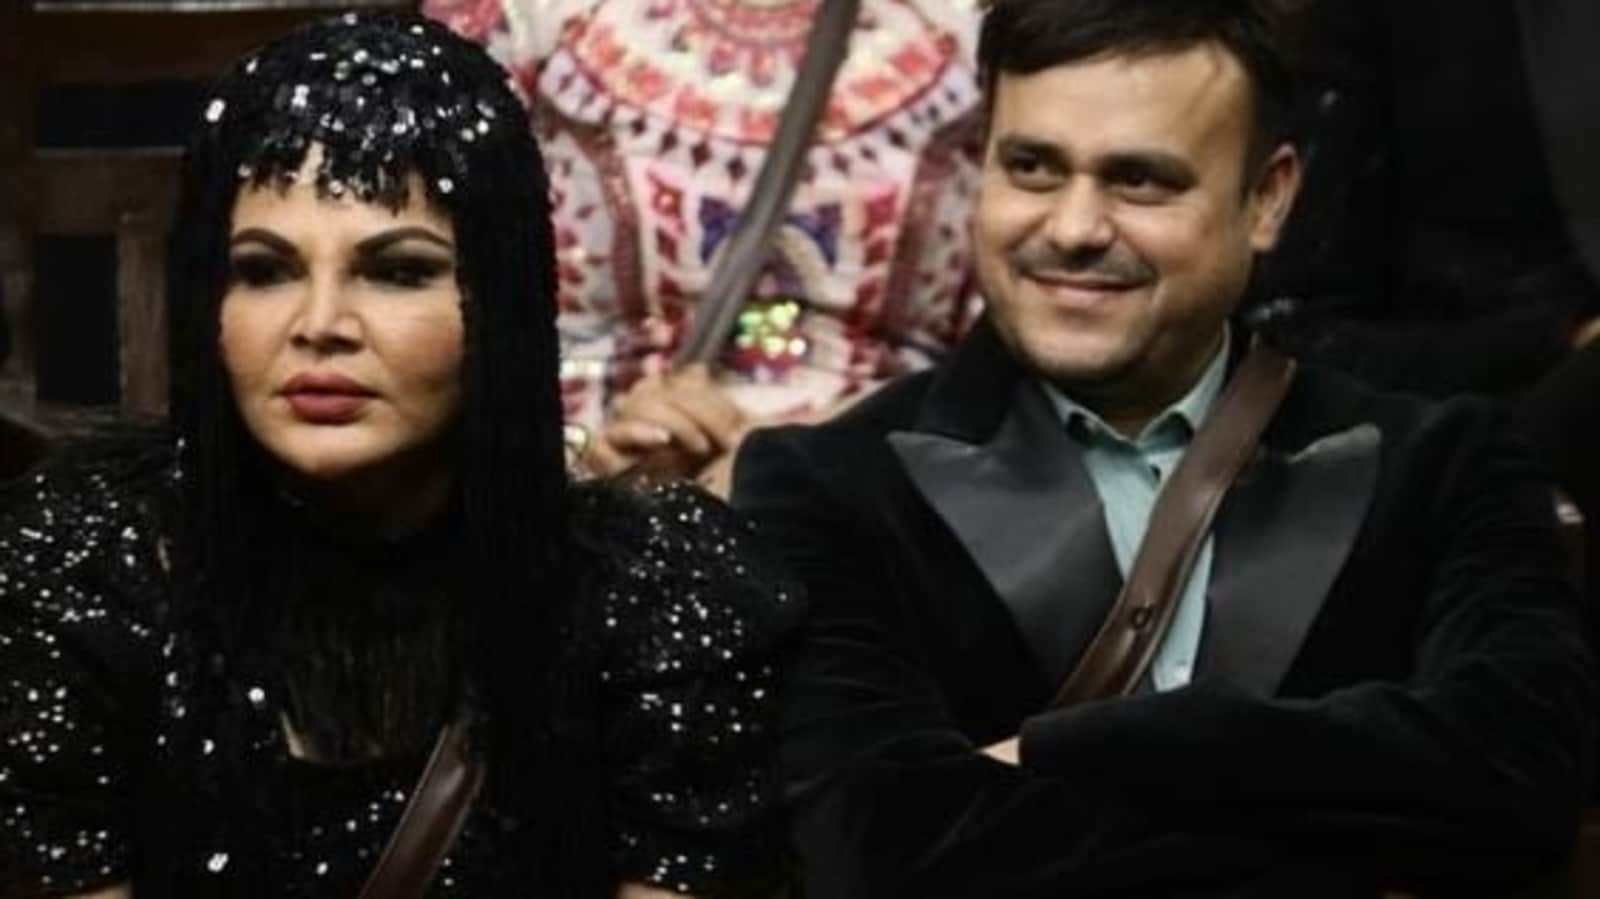 Rakhi Sawant’s ex husband Ritesh warns her against meeting him on any reality show, she says ‘stop your drama’